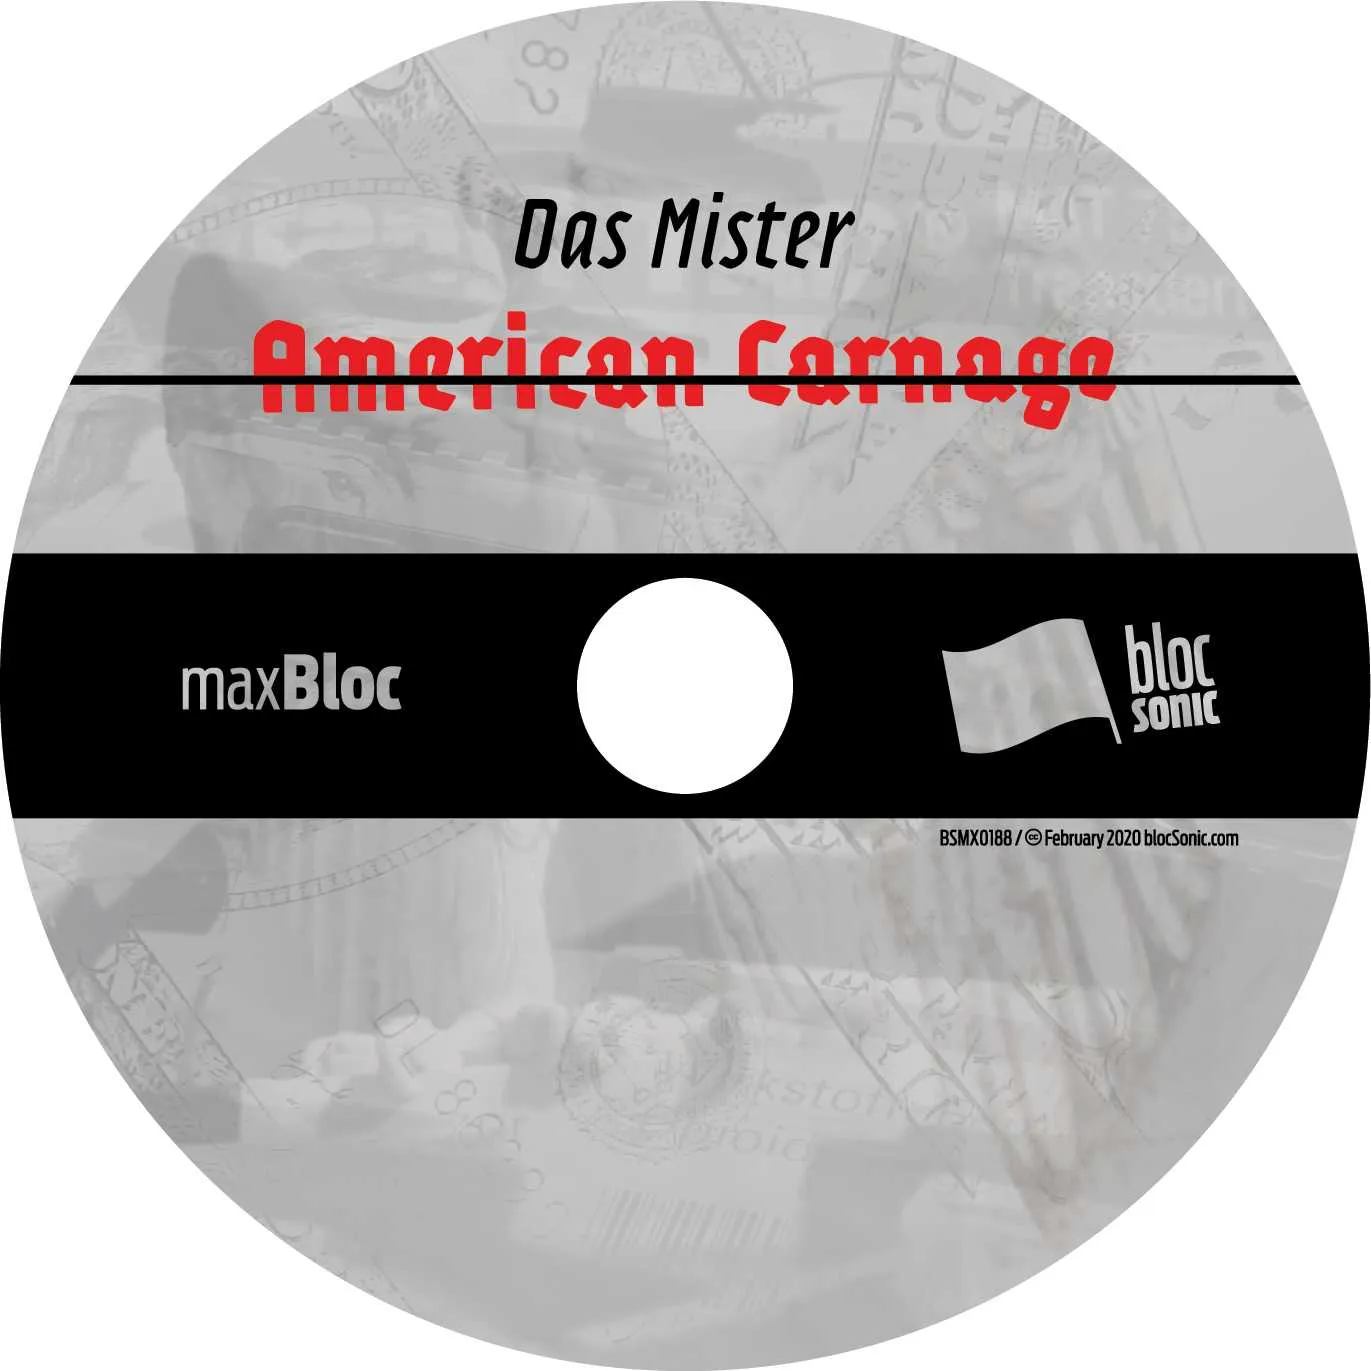 Album disc for “American Carnage” by Das Mister